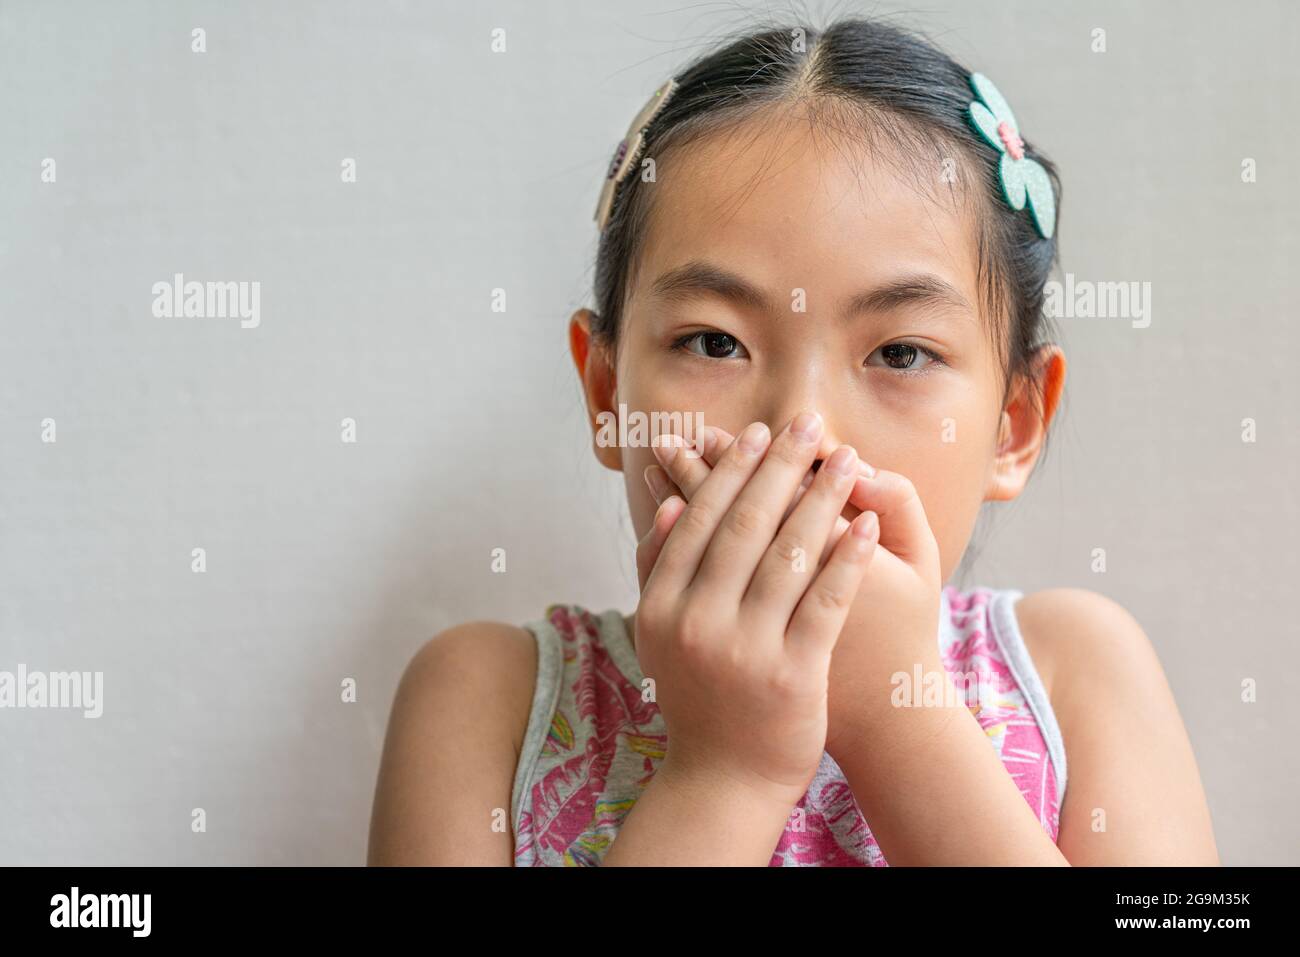 Close-up portrait of Asian little child girl with black long hair tied, covering her mouth with two hands. Stock Photo